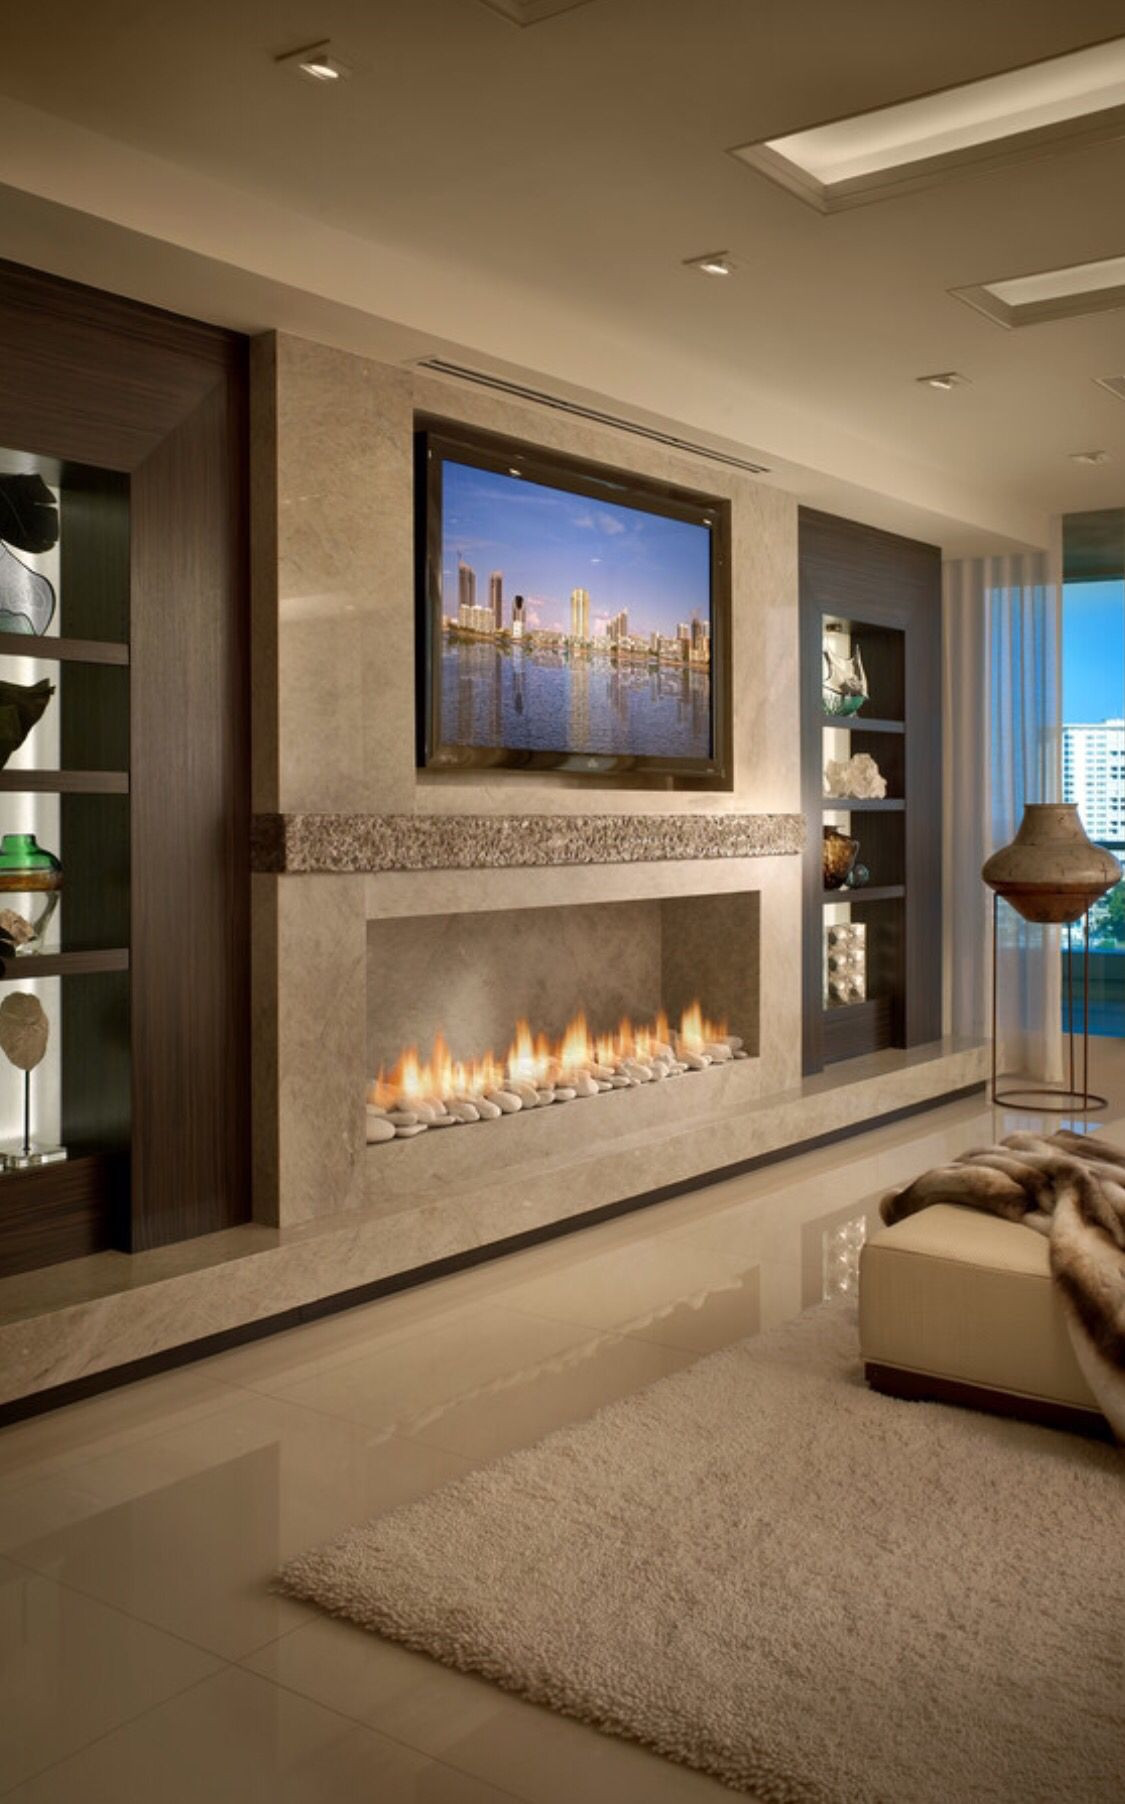 Summit Fireplace Lovely Fireplace Ideas and Fireplace Designs Master Bedroom